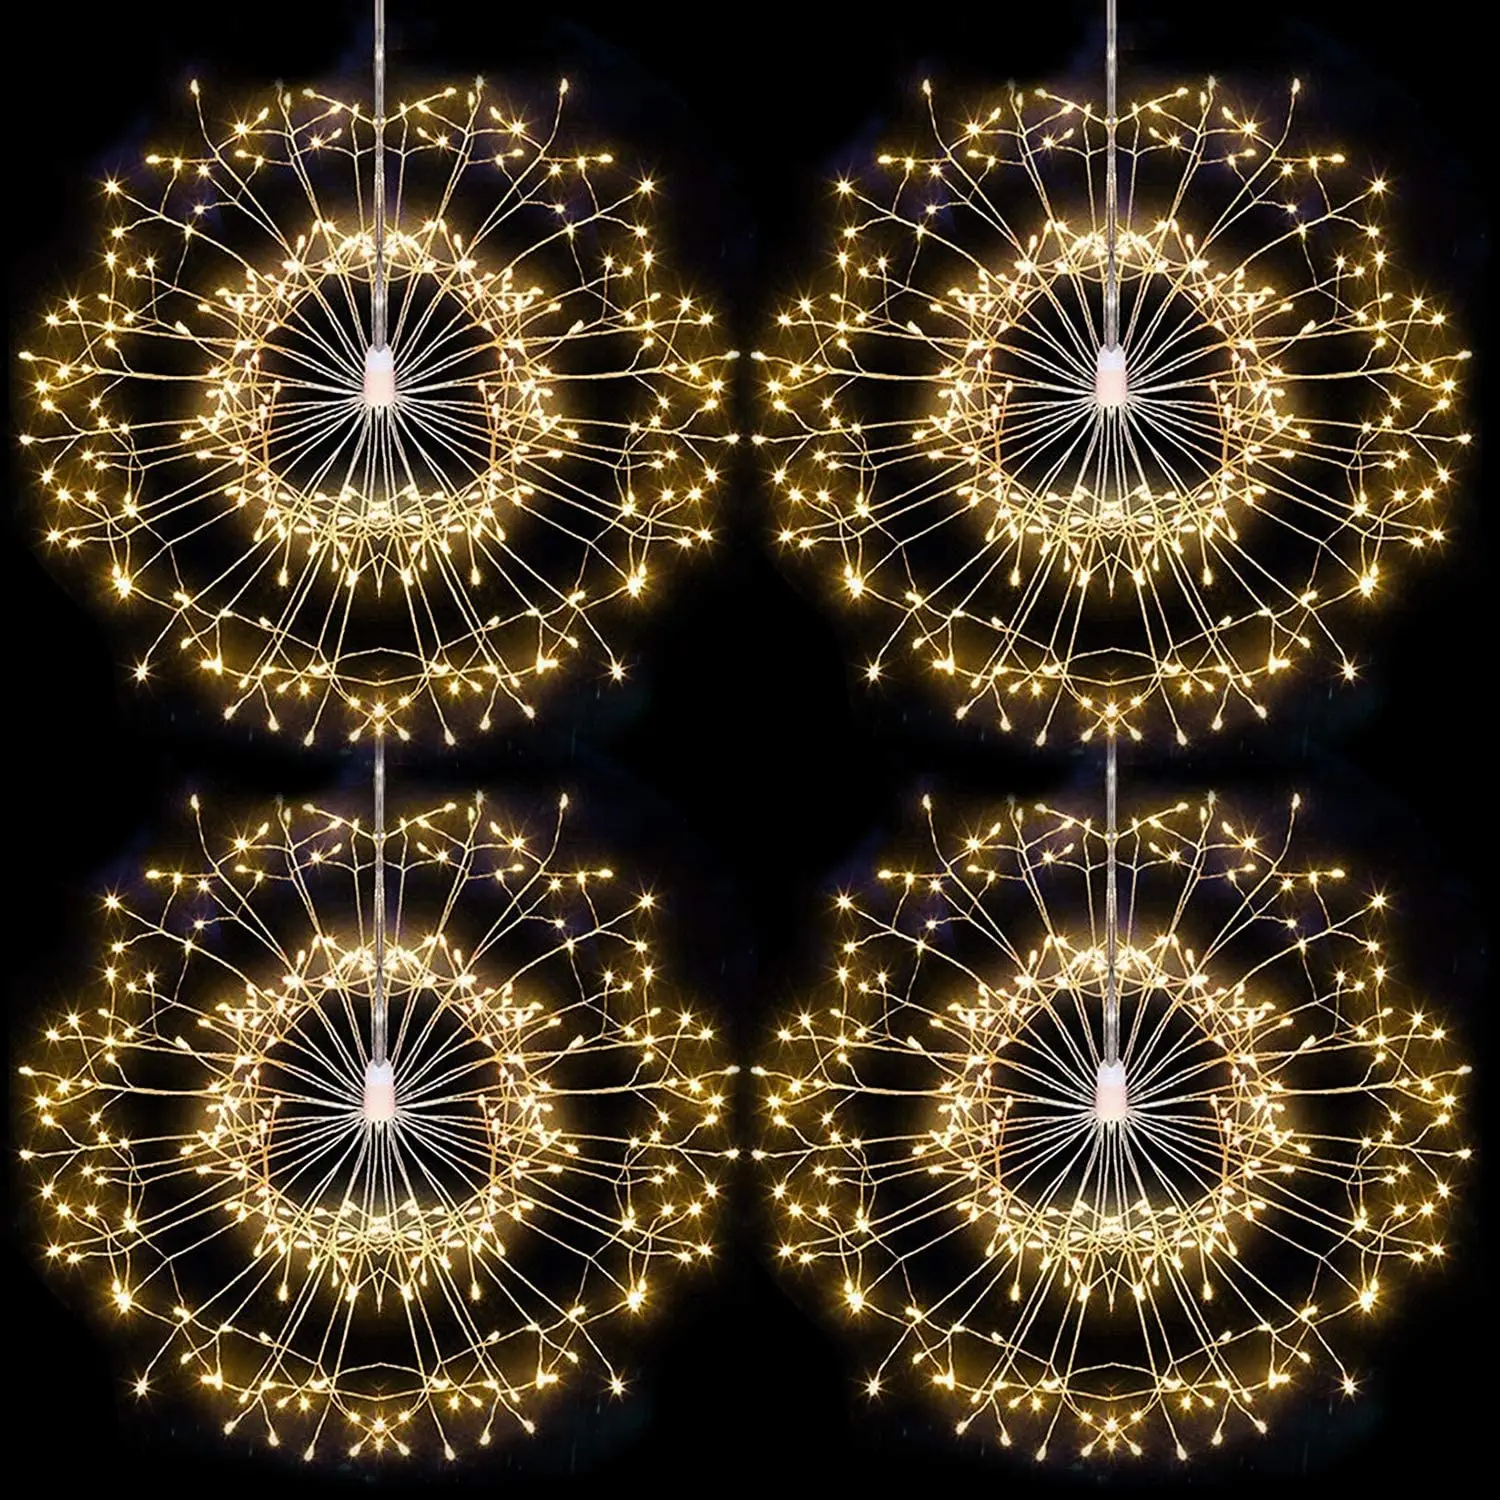 

Firework Lights 120 led Copper Wire Starburst String Lights 8 Modes Battery Operated Fairy Lights with Remote Wedding Decorative